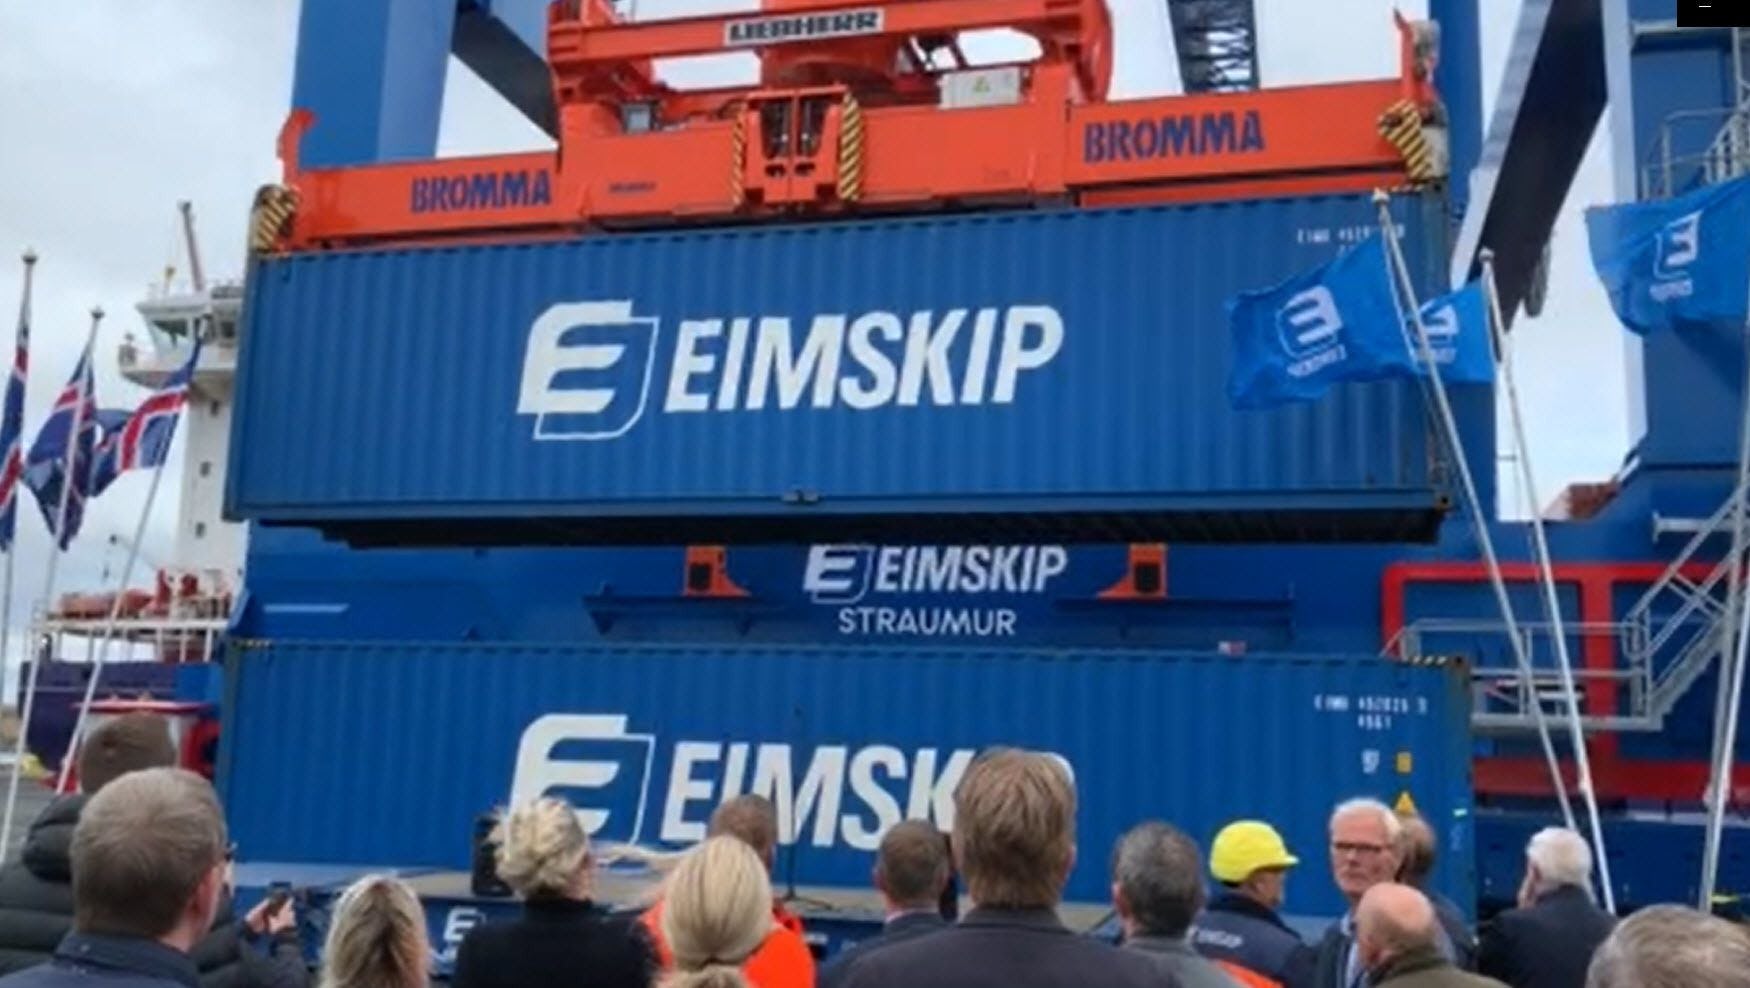 People observing a large piece of orange machinery on top of Blue big shipping containers